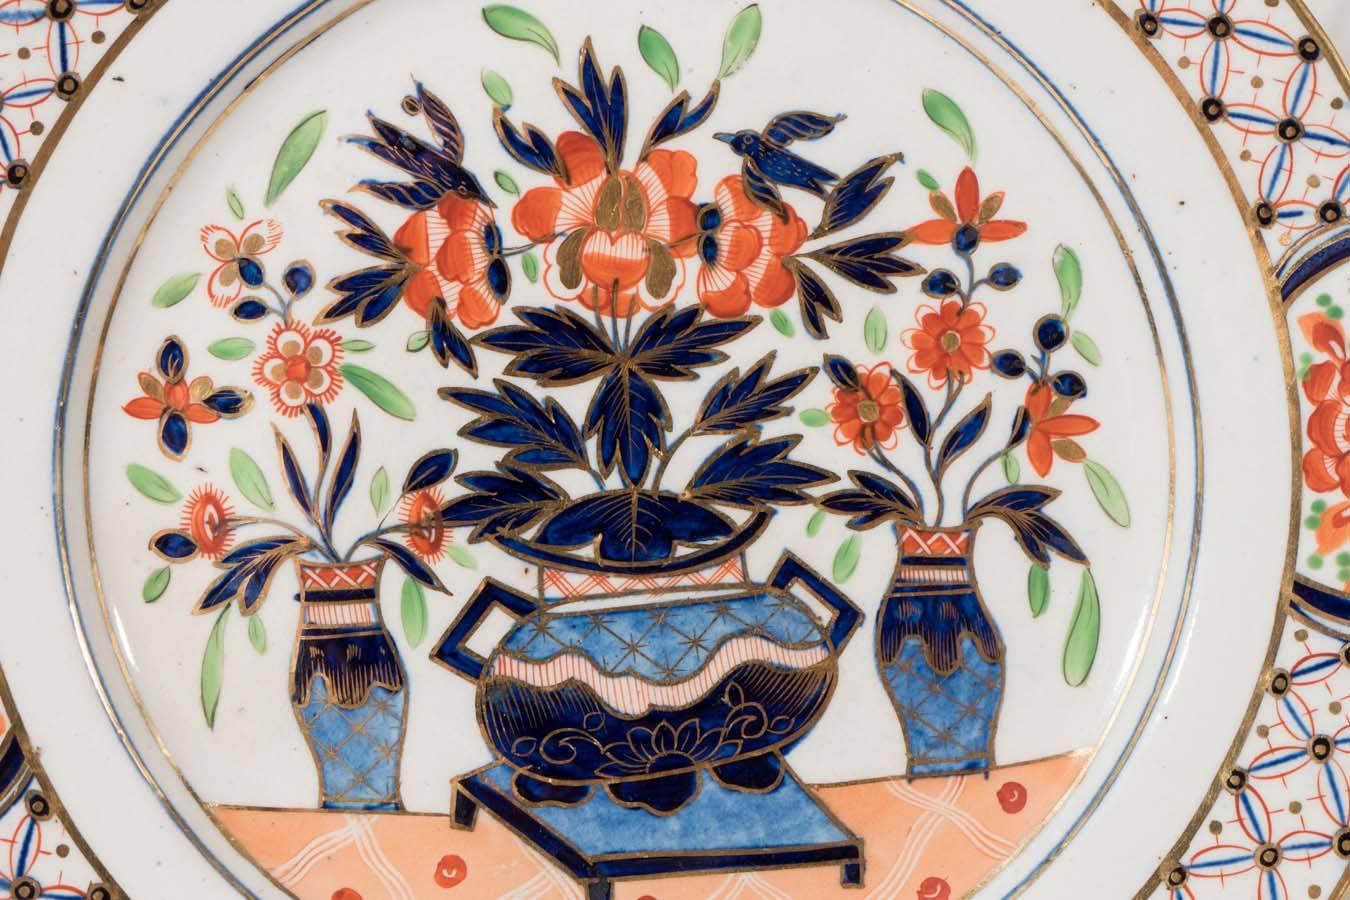 Japonisme Set of 19th Century English Dishes in Imari Style with Cobalt Blue and Orange